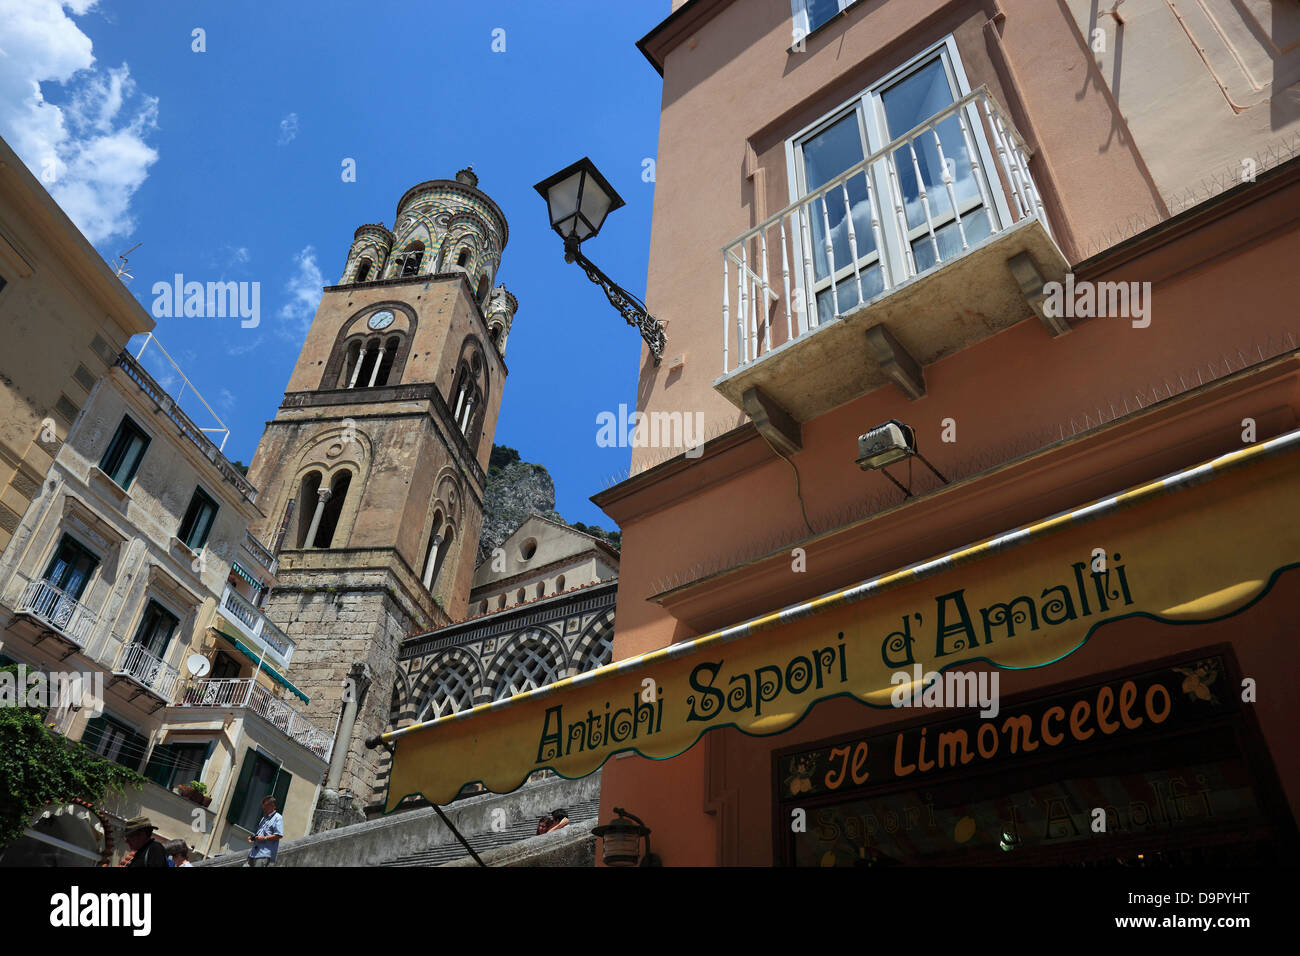 Cathedral Square and Cathedral Cattedrale di Sant 'Andrea, Amalfi, Campania, Italy Stock Photo